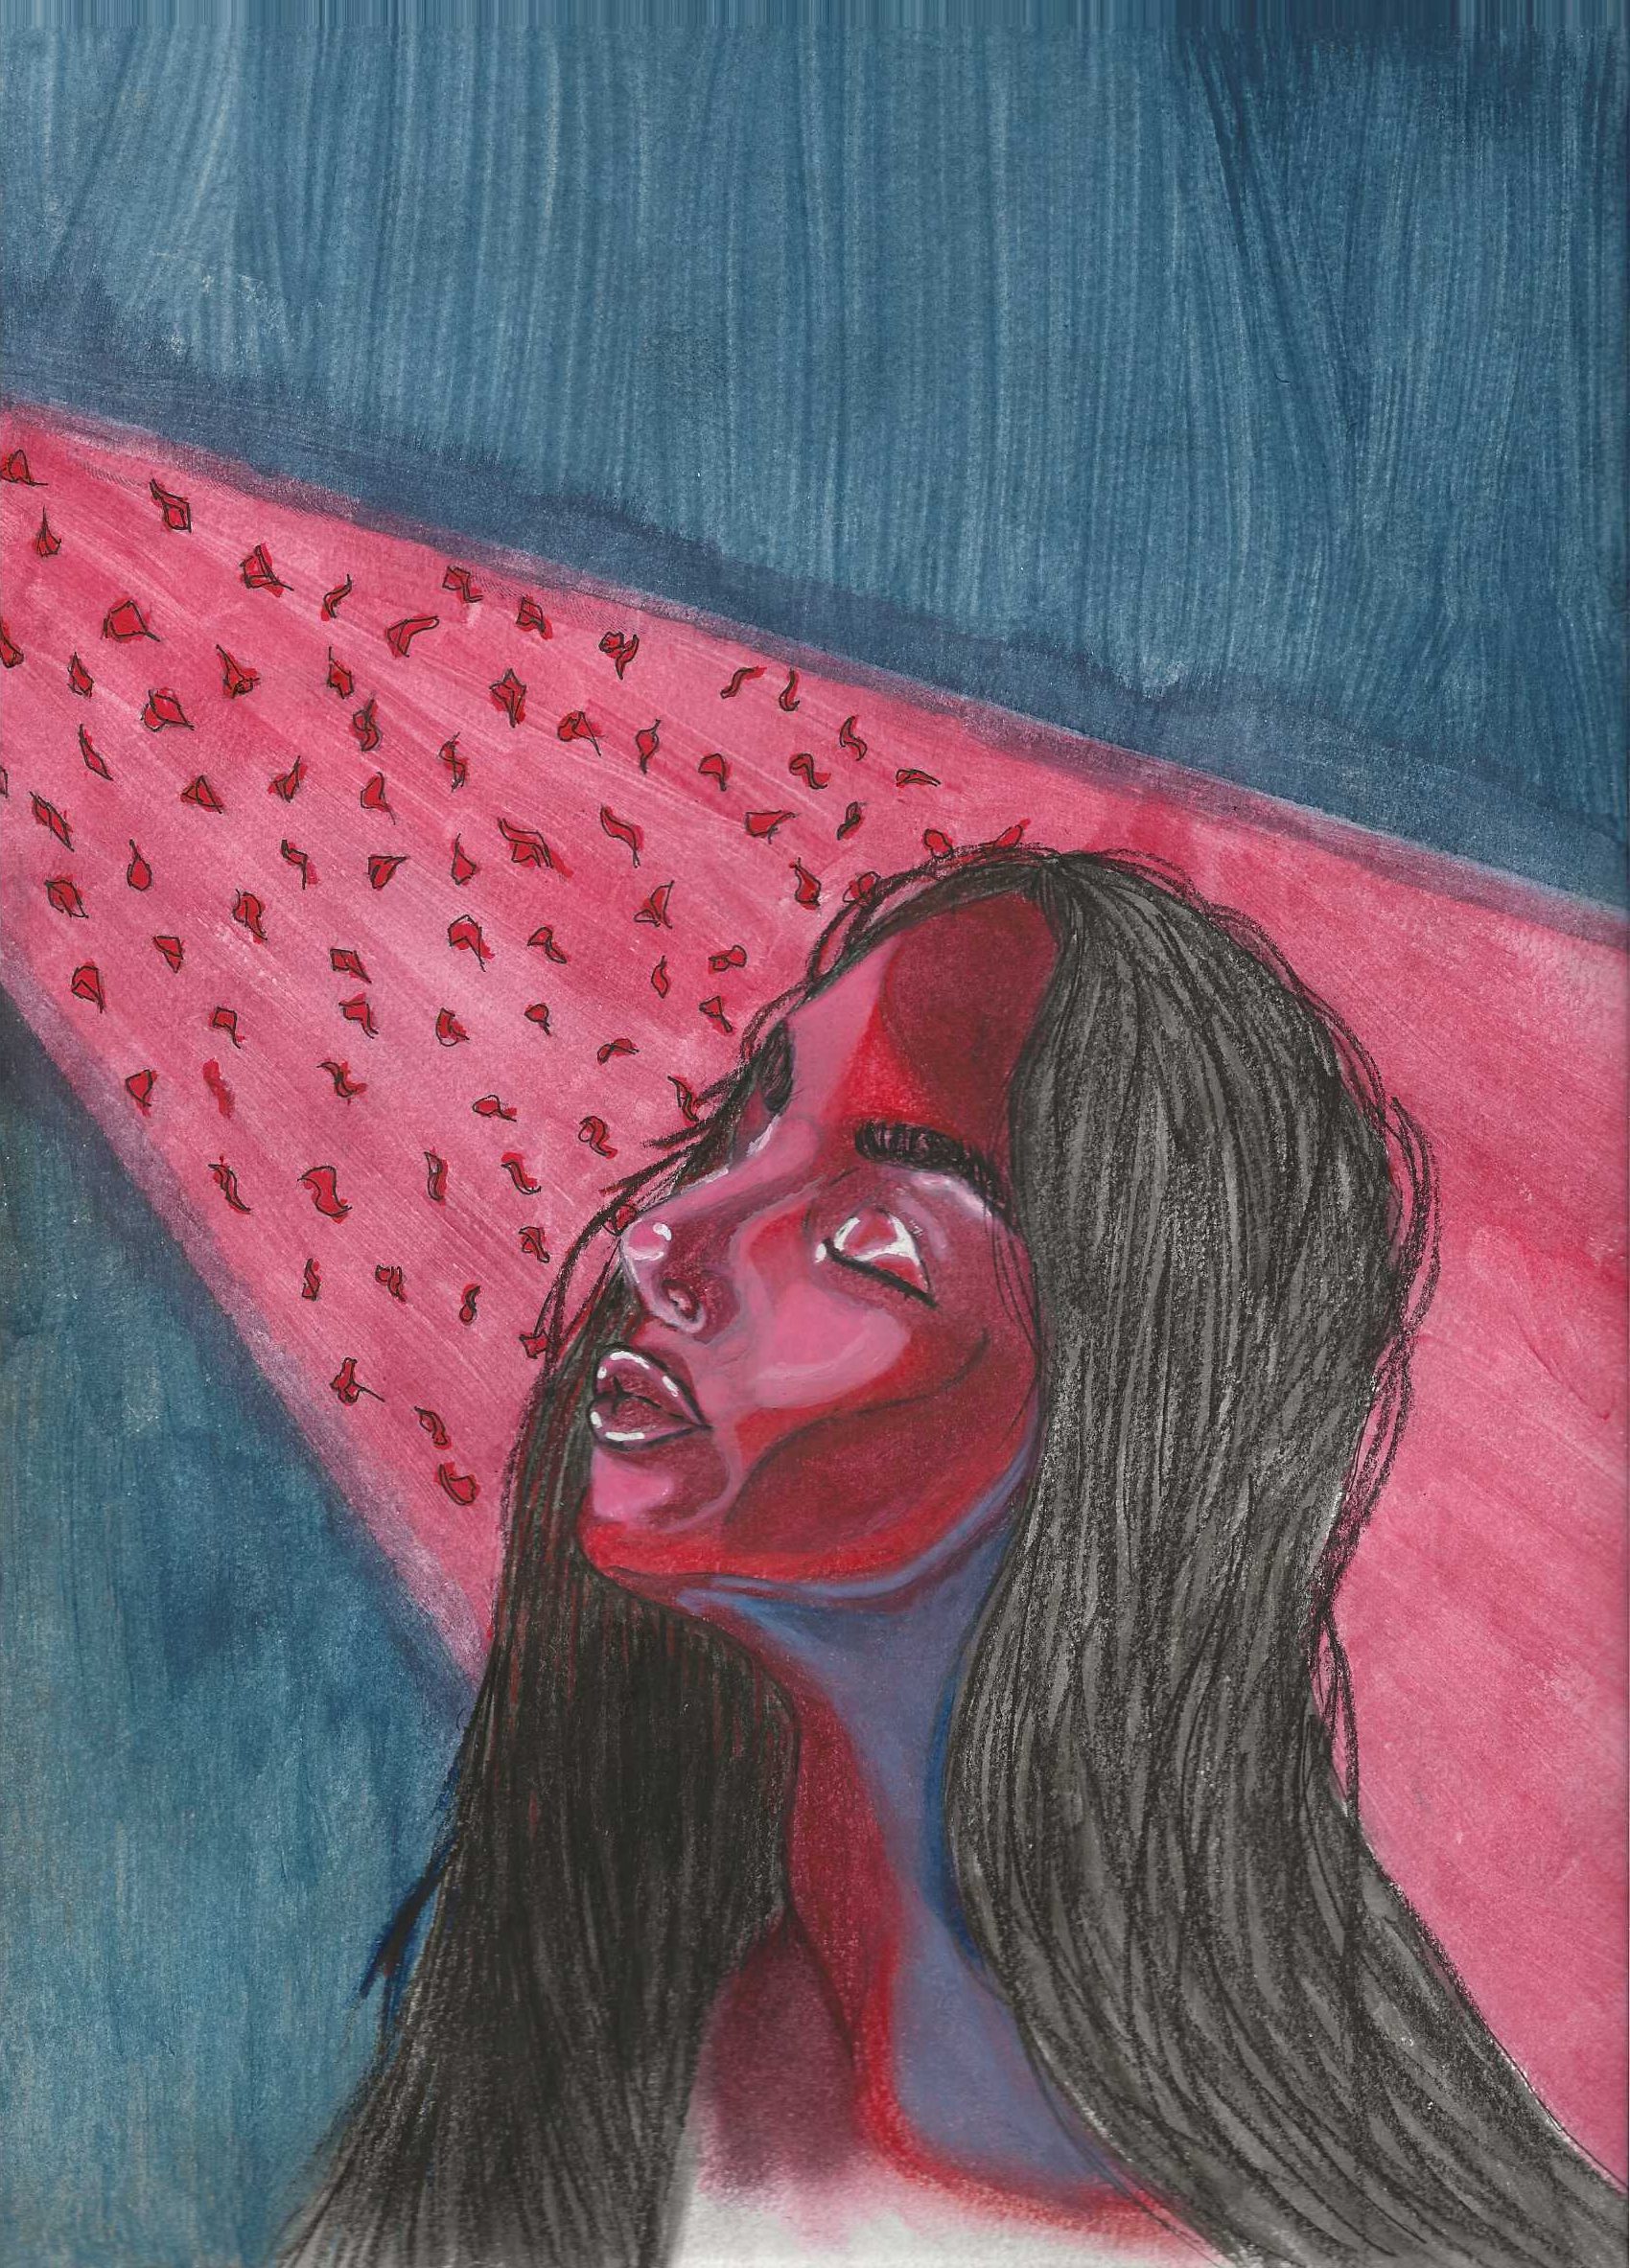 An illustration of a woman at a three-quarters view looking towards the upper left corner of the image. A pink ray of light filled with floating rose petals shines on her face, coloring her skin in shades of maroon with blue shadows. The woman appears serene, with her eyes closed and mouth parted. The artists describes the piece as, "A woman praying as ray of light, colored in a pink hue is shone in a room filled with blue shadows. Rose petals fall from the sky, towards her face that is lifted upwards at the source of the light."